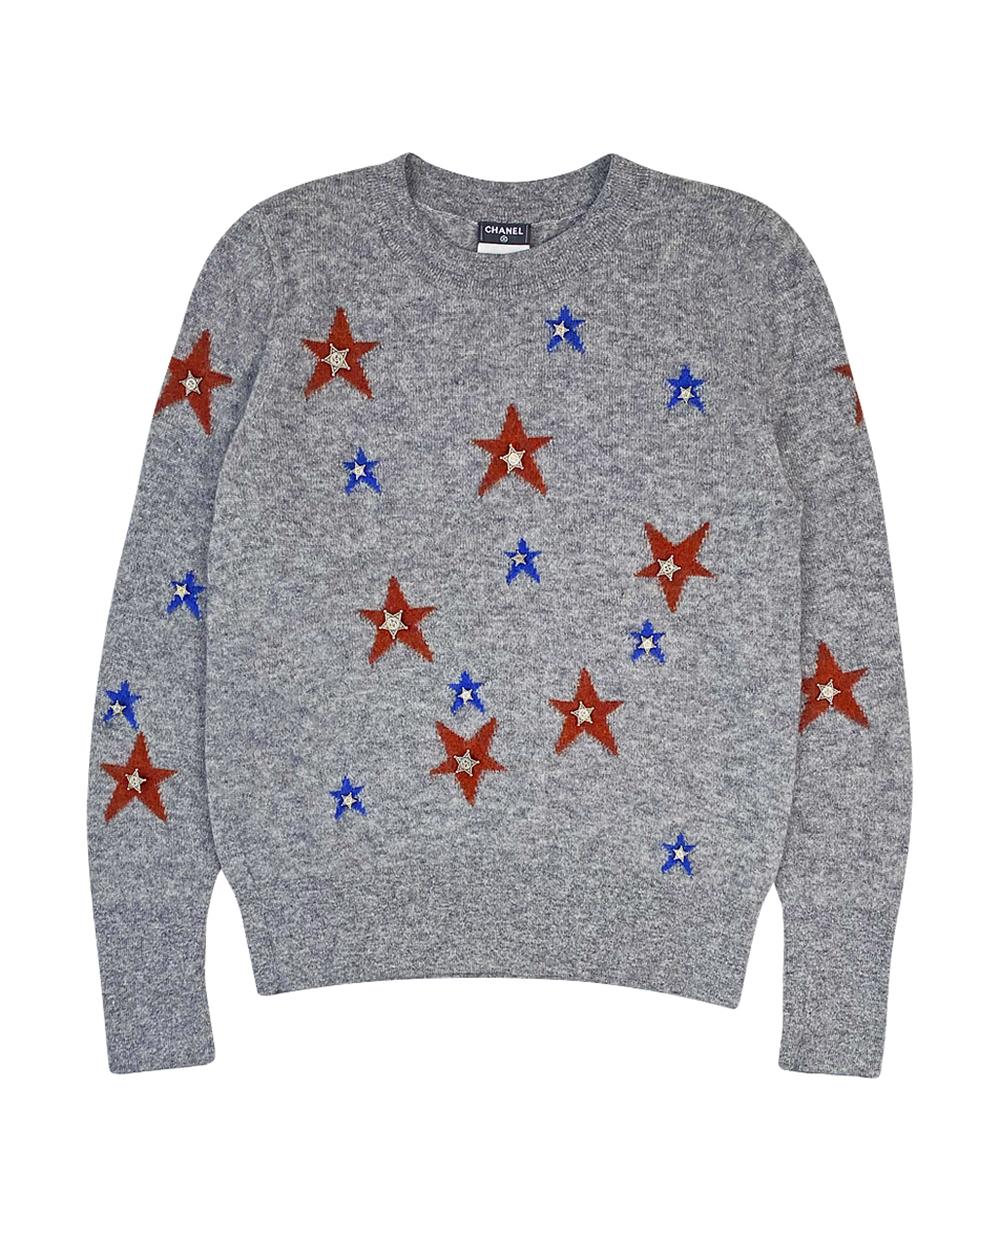 Chanel cashmere jumper with CC star charms from Paris / DALLAS Collection
As seen on Pharrell Williams!
Size mark 38 FR. Kept unworn.